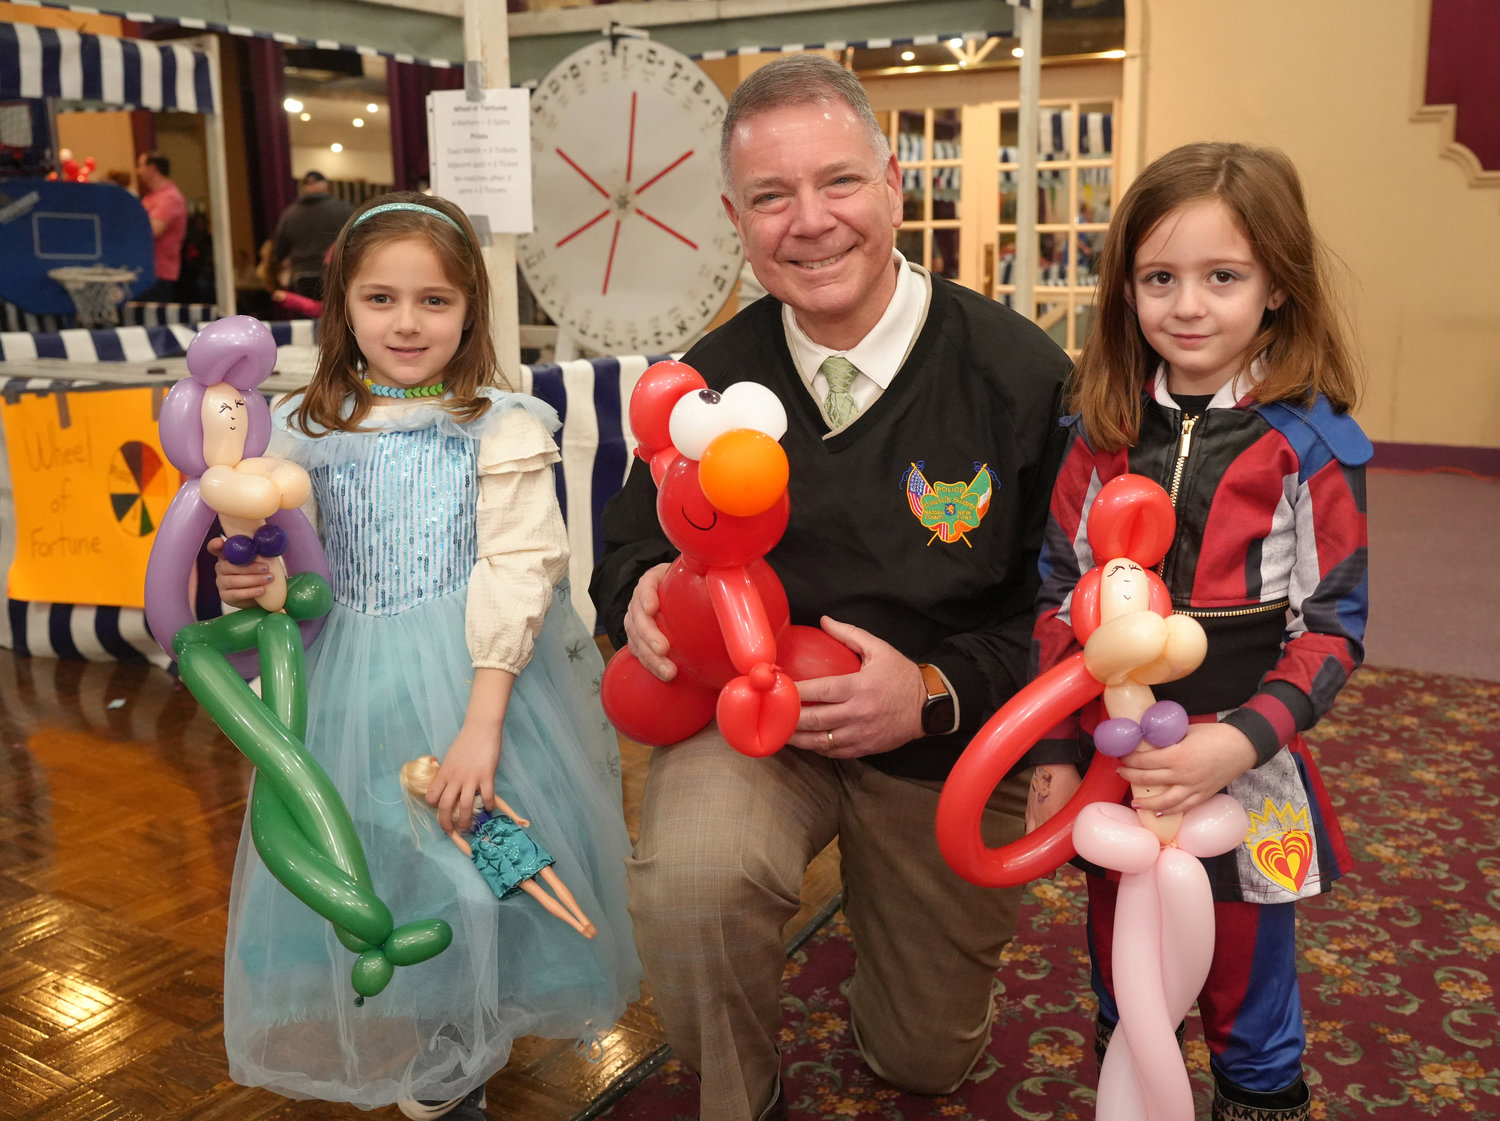 Bella Dashefsky, left, and Madison Wattel got balloon animals with State Sen. Steve Rhoads at the 28th Annual Mel Polay Purim Carnival last Sunday. Story, more photos, Page 5.